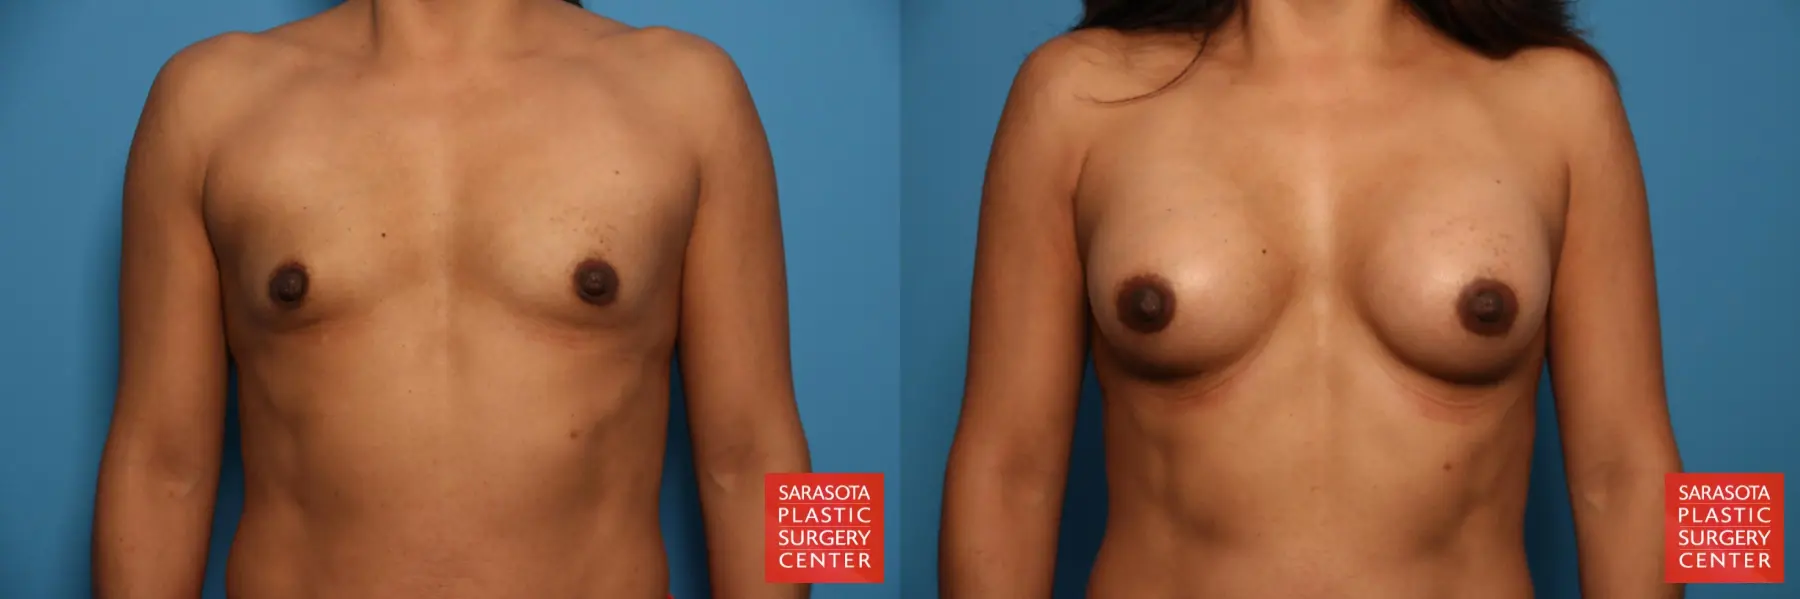 Breast Augmentation - Subfascial: Patient 3 - Before and After  